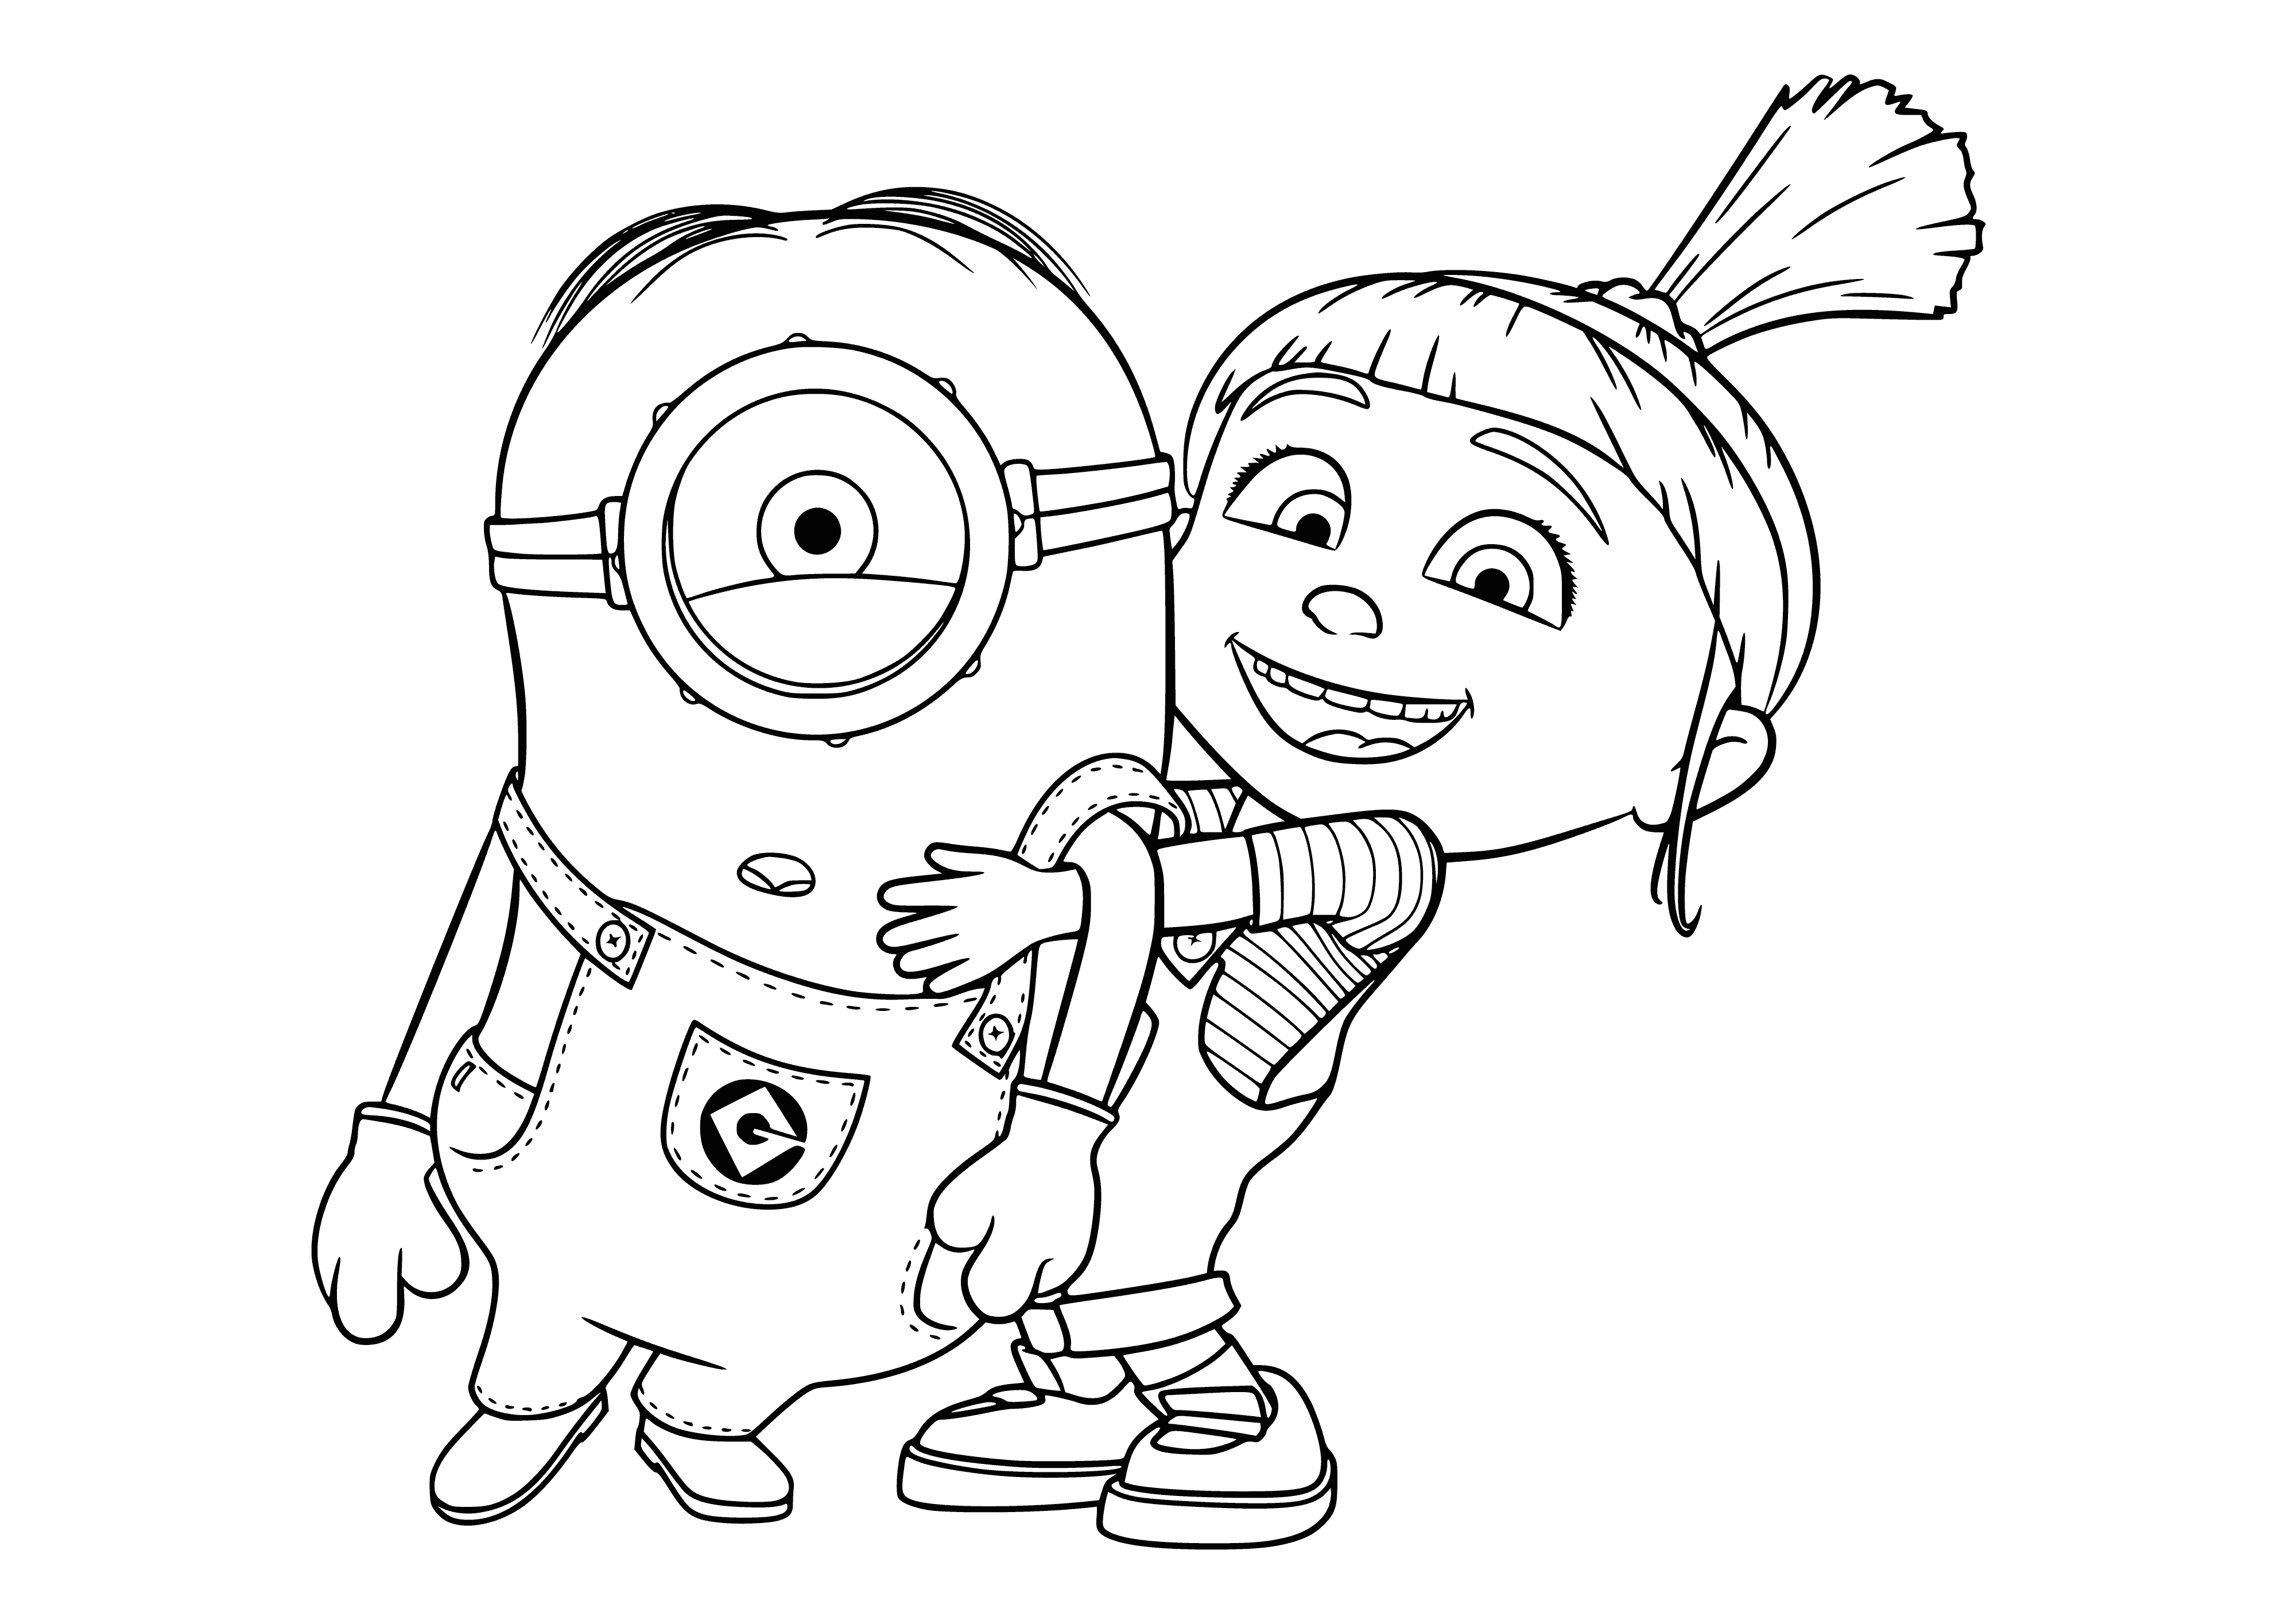 coloring page: Two girls, smiling, holding meaningful items to them.